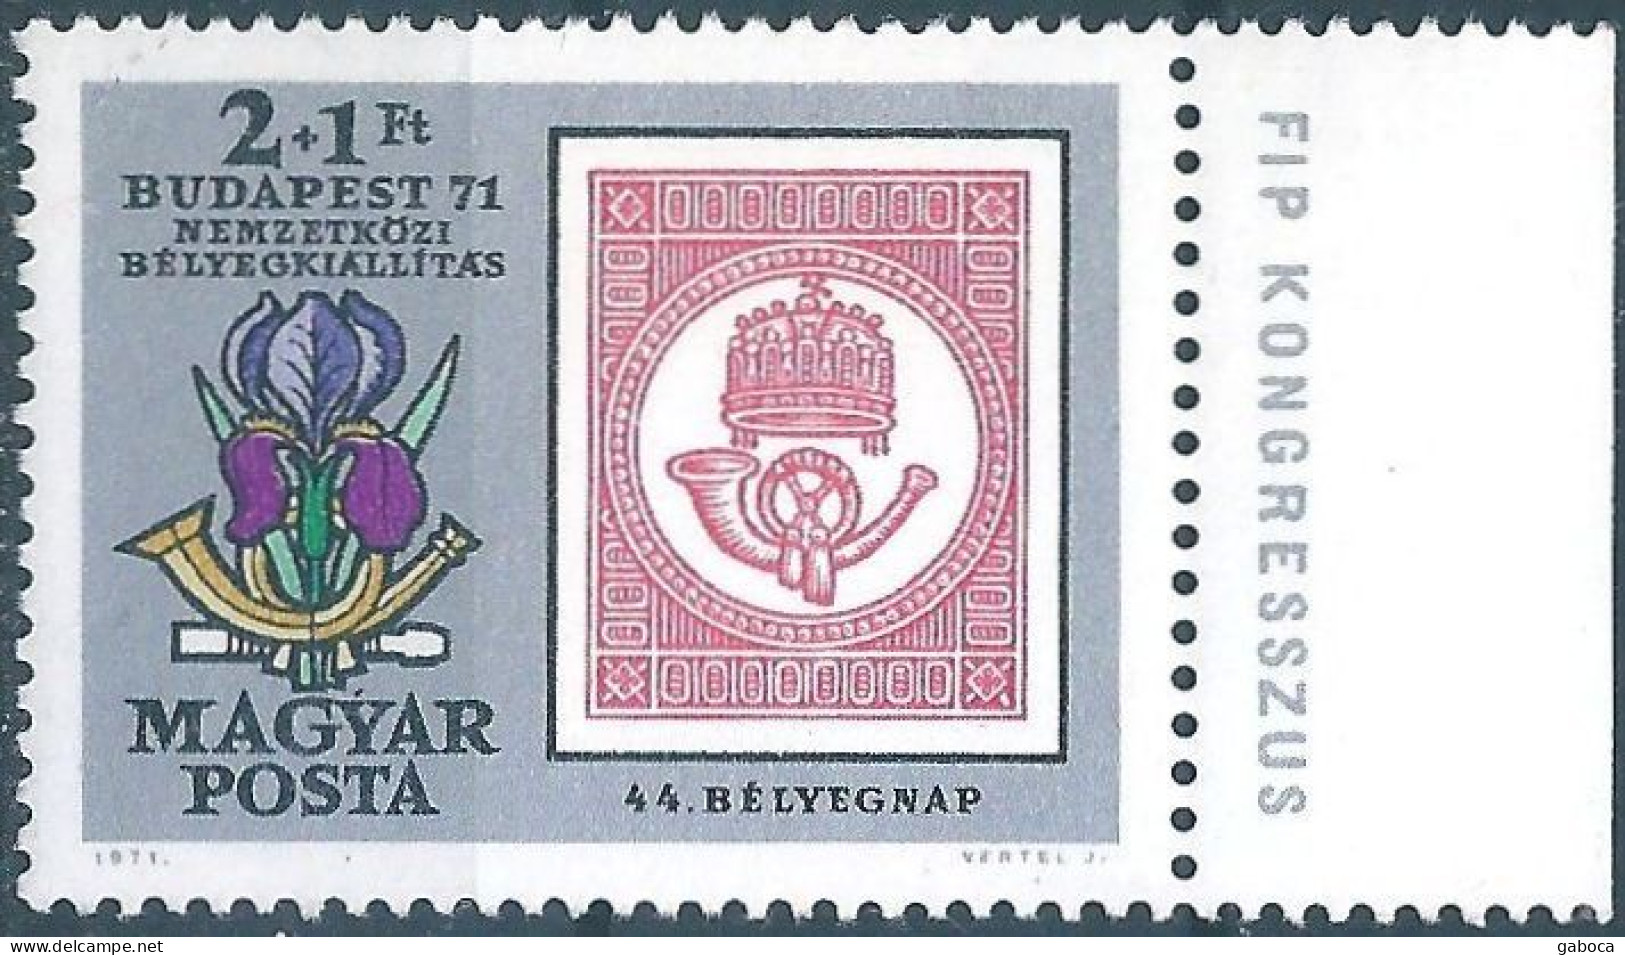 C5927 Hungary Philately Stamps Day Music Horn Flower MNH RARE - Día Del Sello